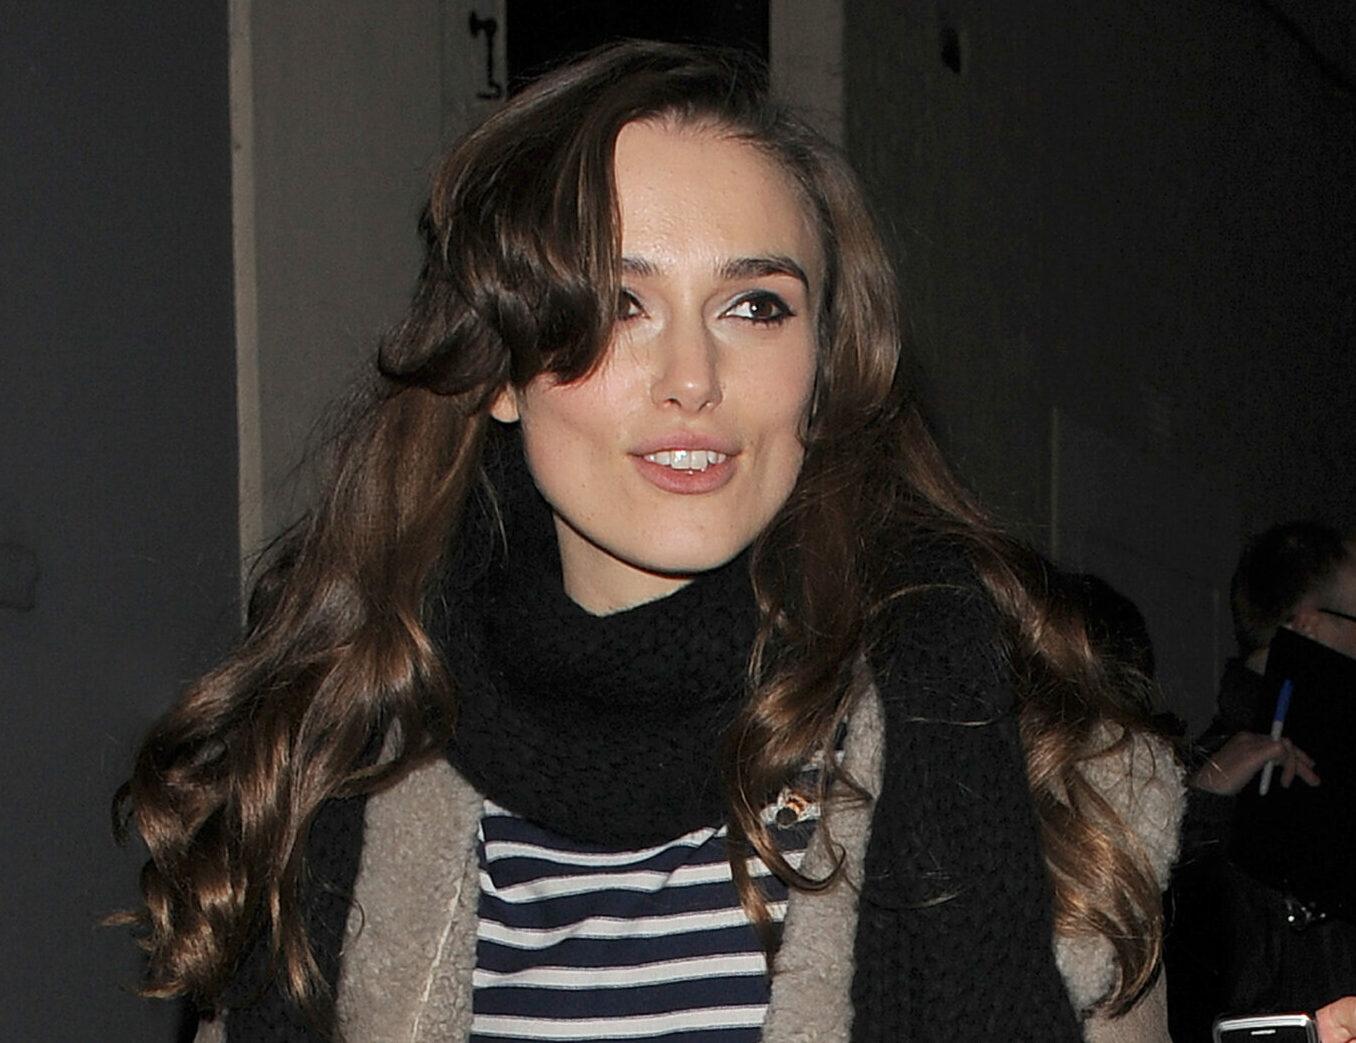 Keira Knightley leaving the Comedy Theatre after her performance of West End production The Misanthrope